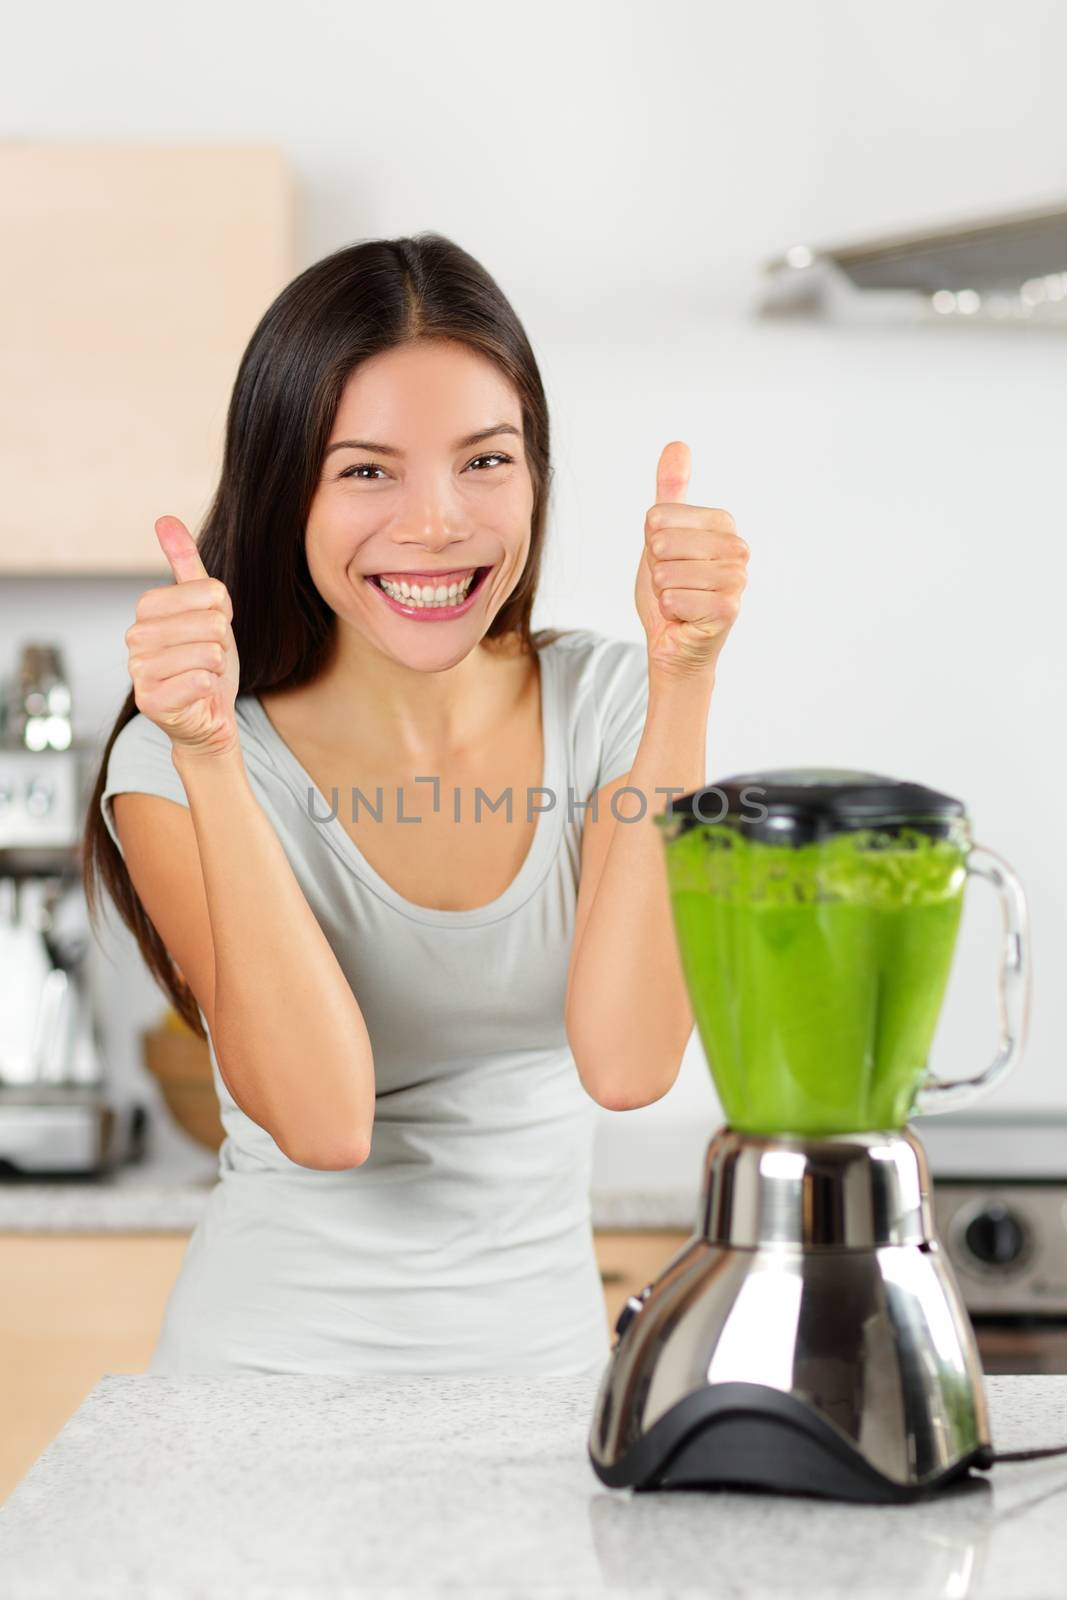 Vegetable smoothie woman happy thumbs up by Maridav